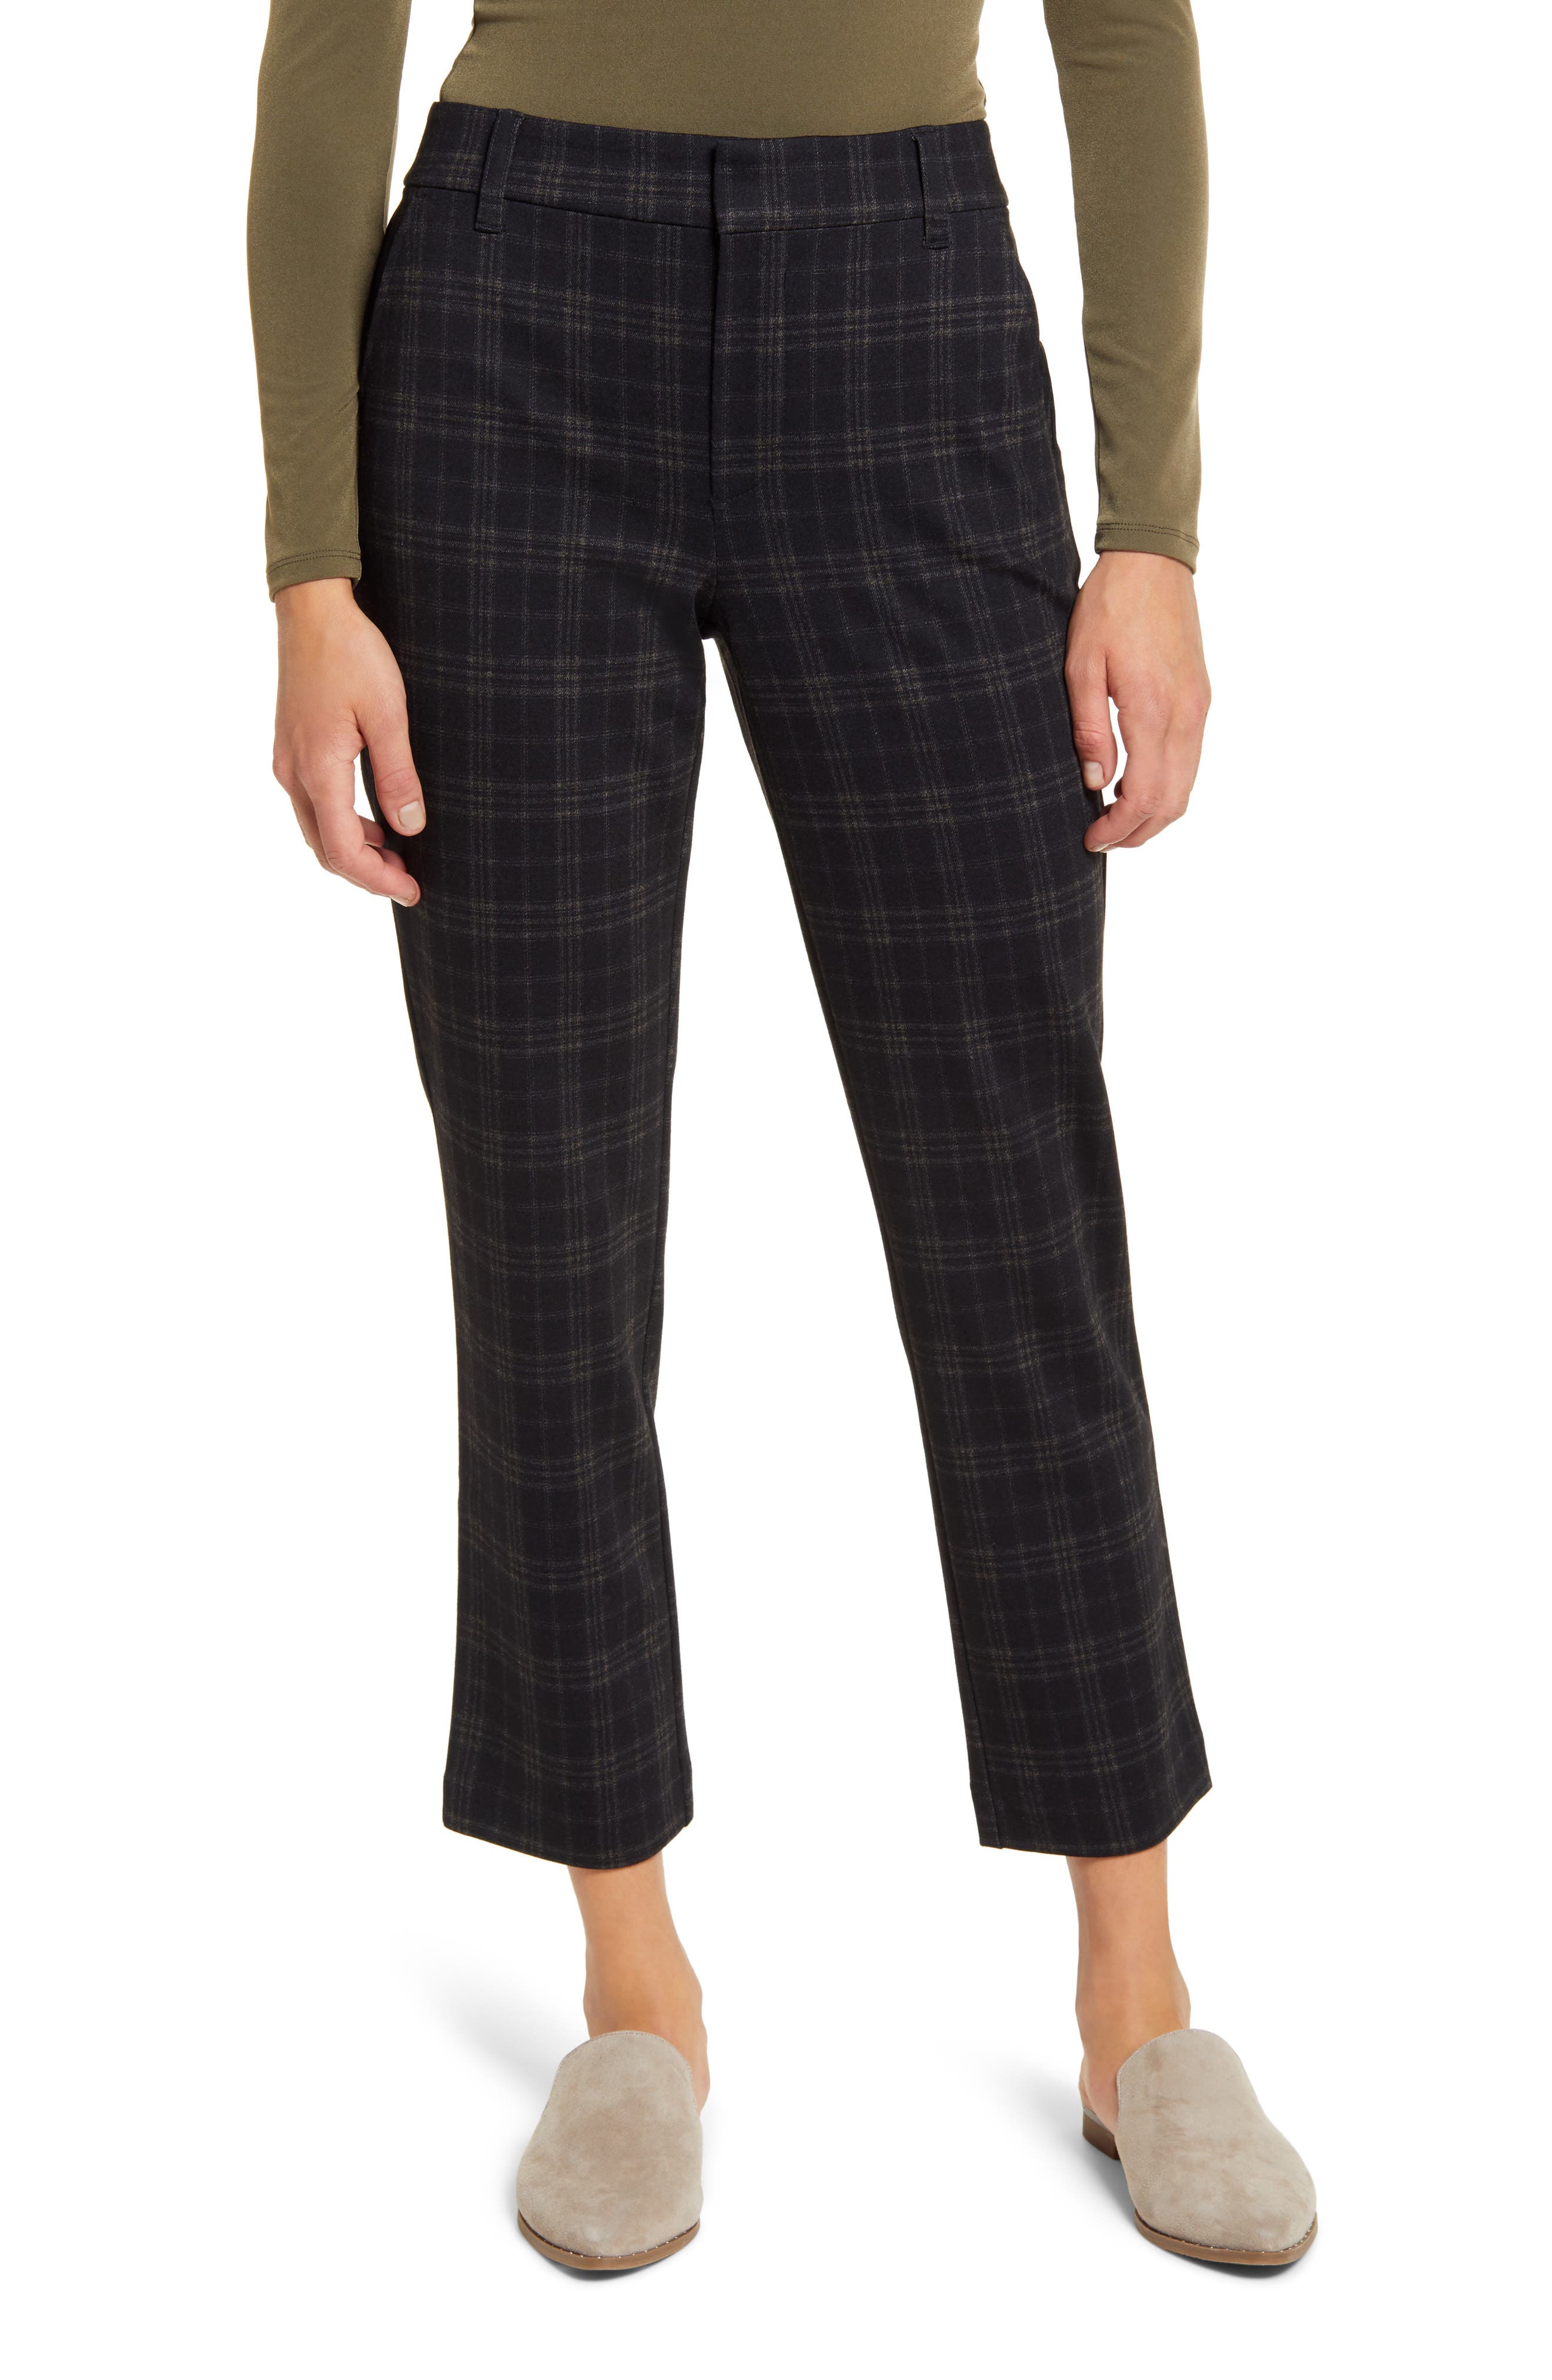 wit and wisdom petite pants